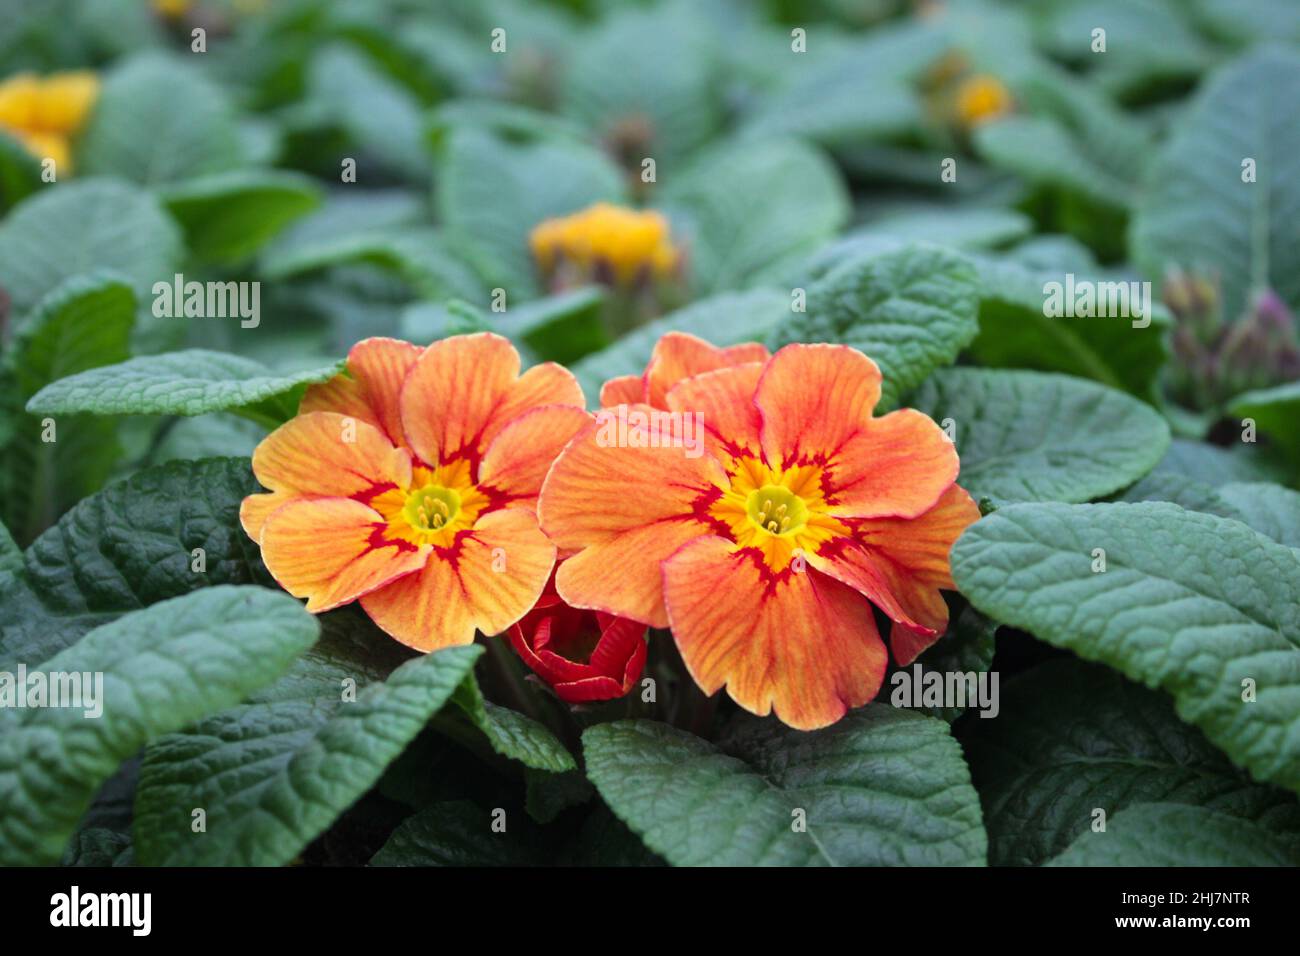 Close-up of a bright orange with a red and yellow center of a primrose flower - cowslip in a flower pot. Stock Photo